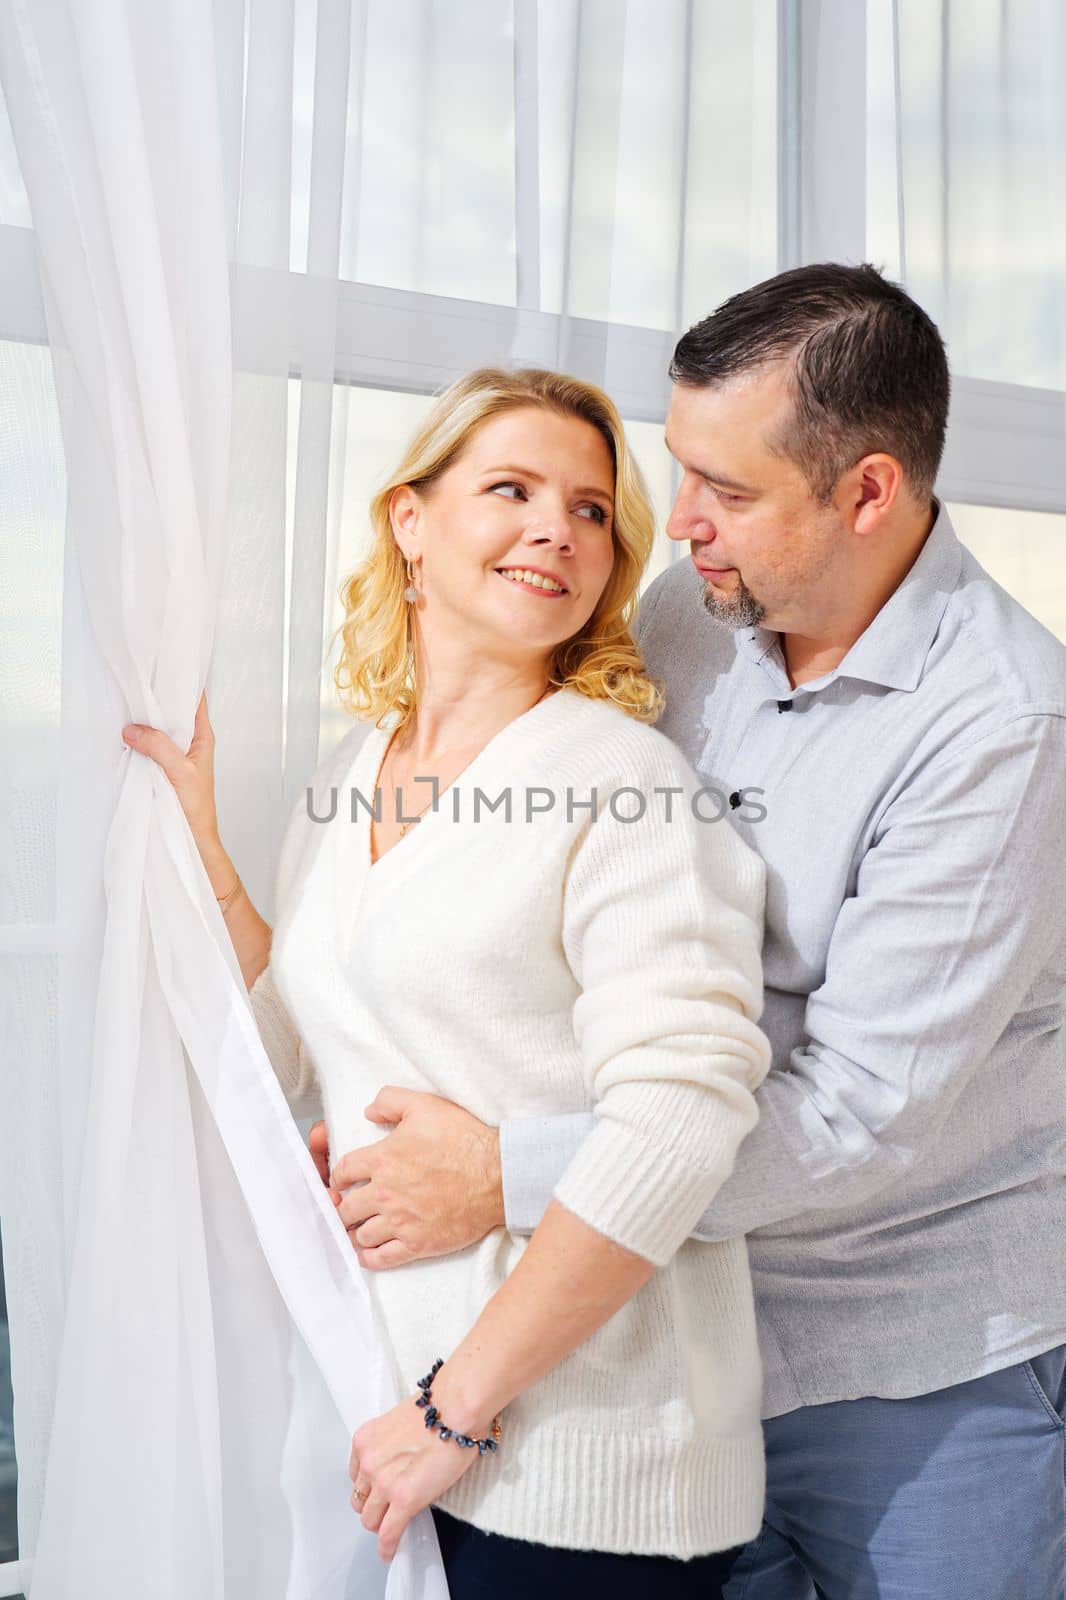 Middle aged blond woman and man portrait. 40s couple embracing in front of window.